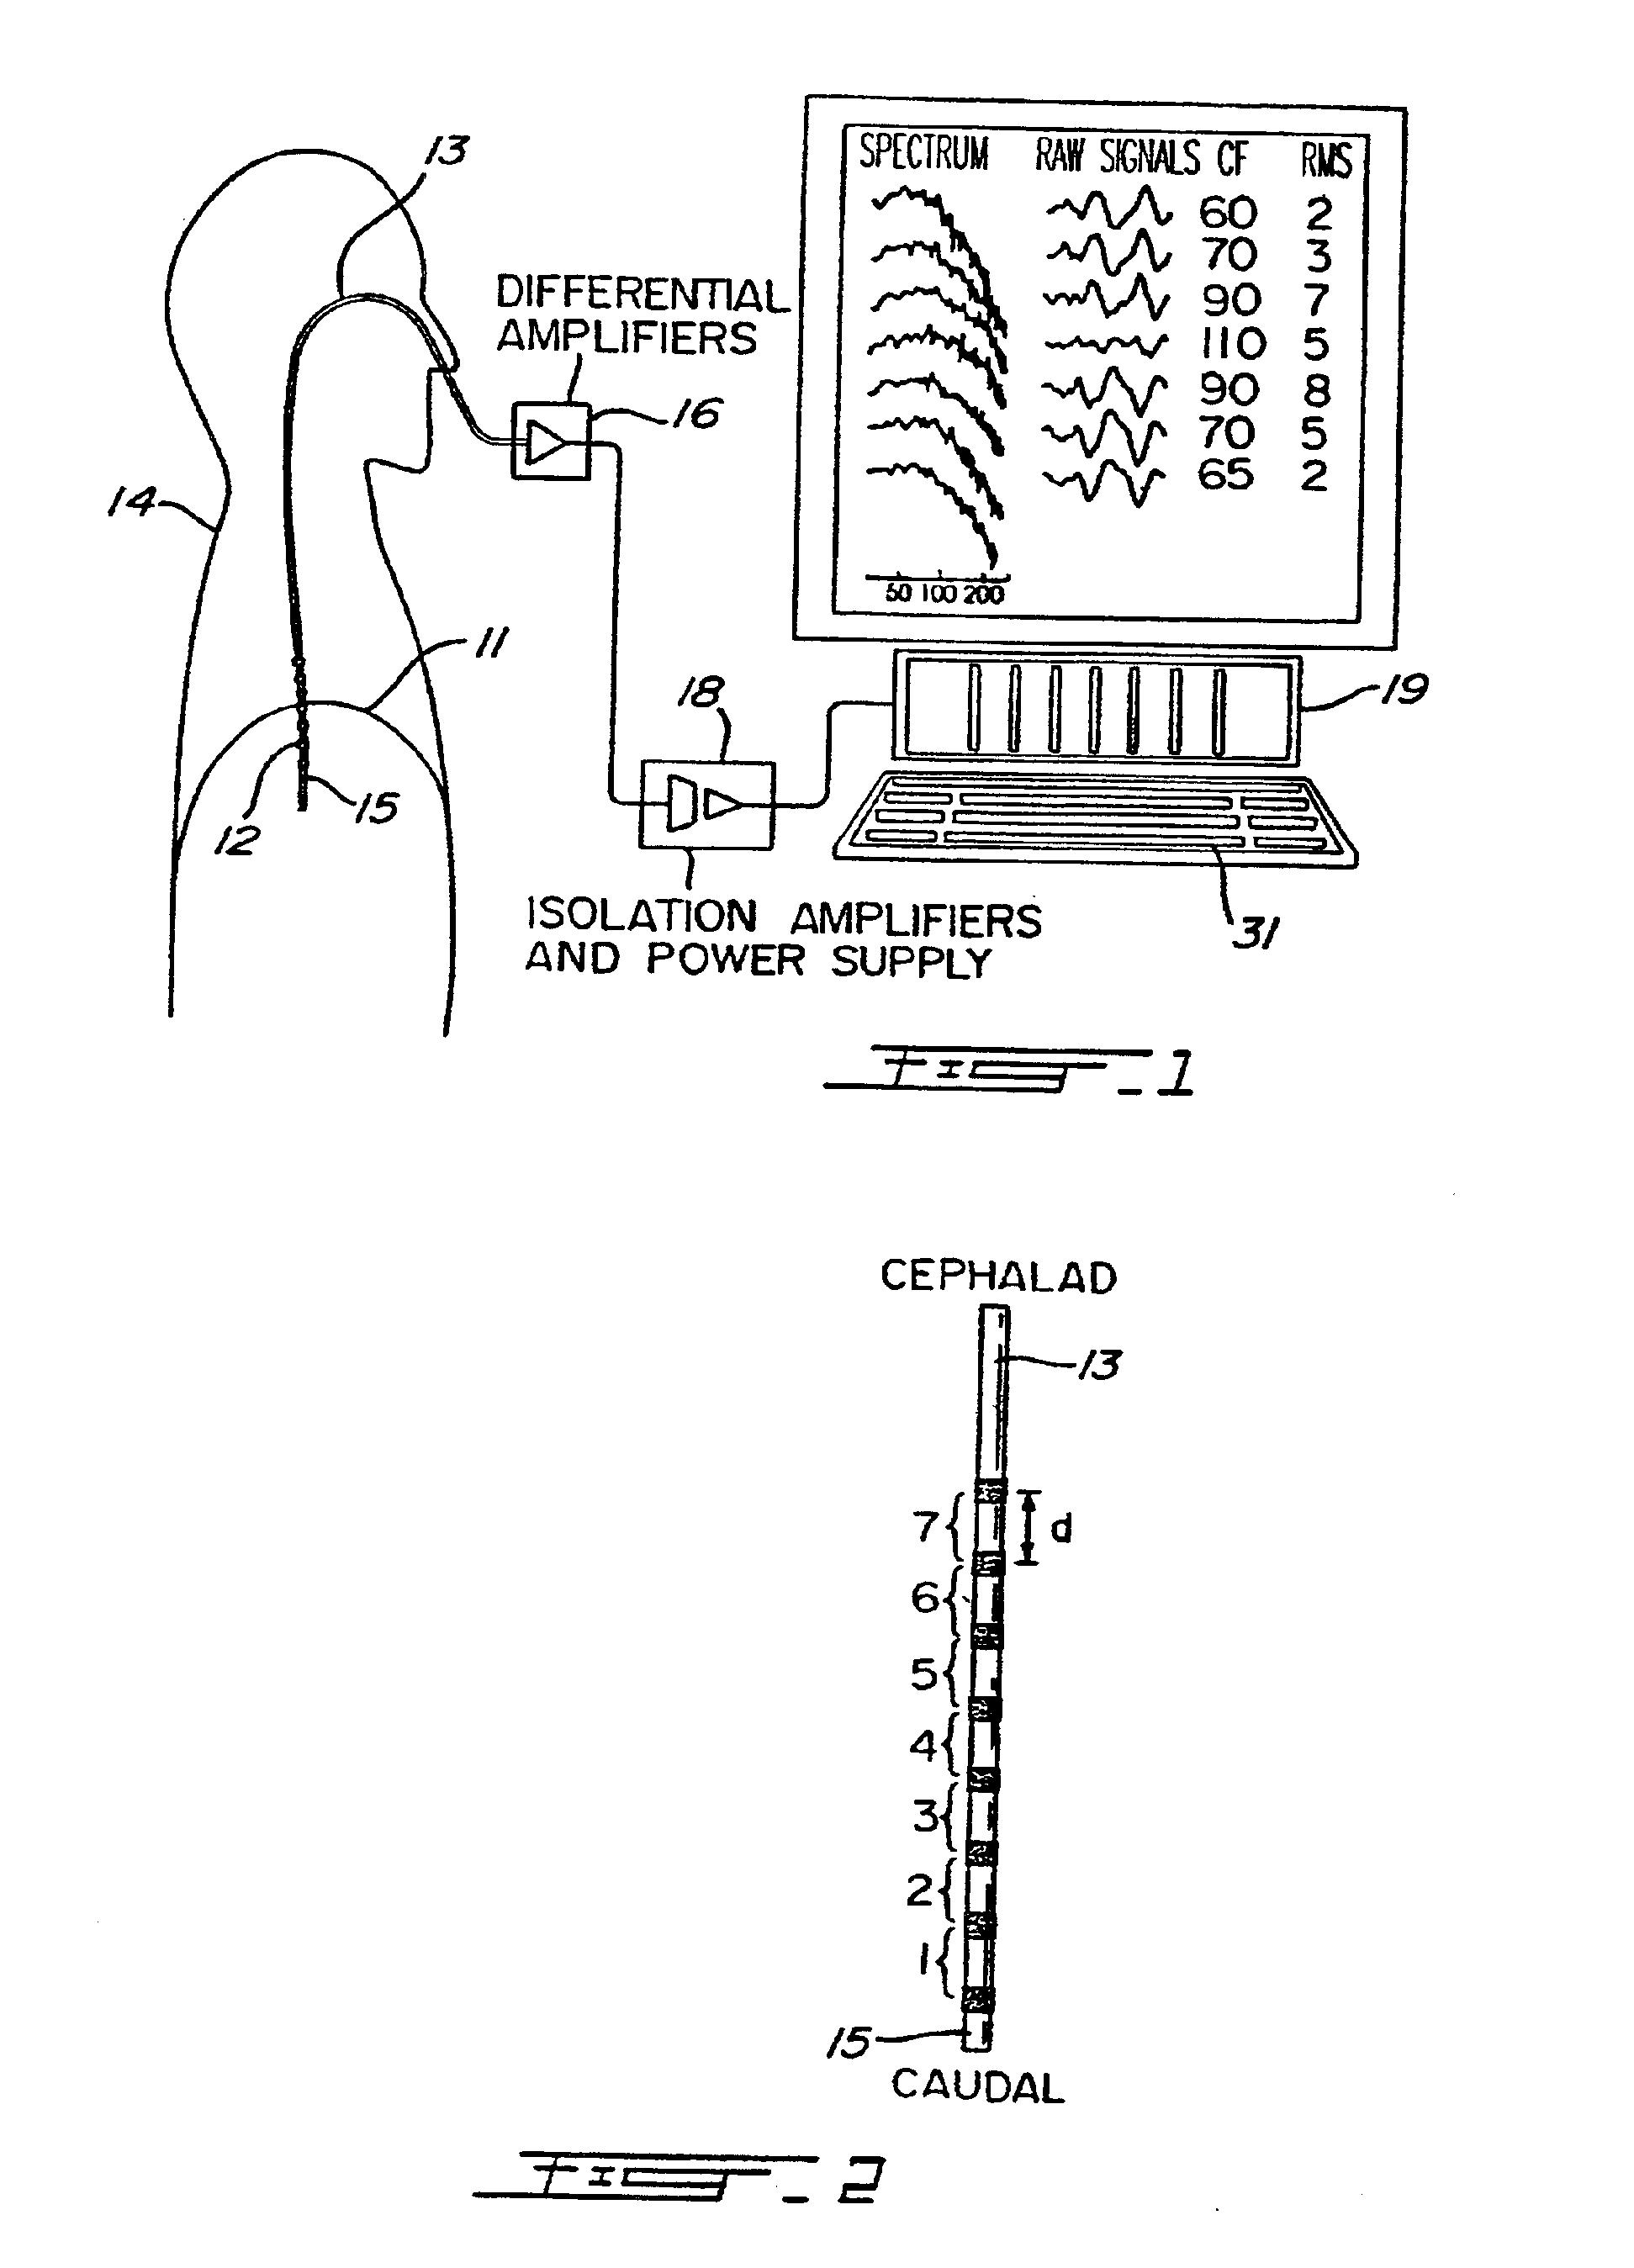 Method and system for producing a higher quality electromyographic signal from an electrode array